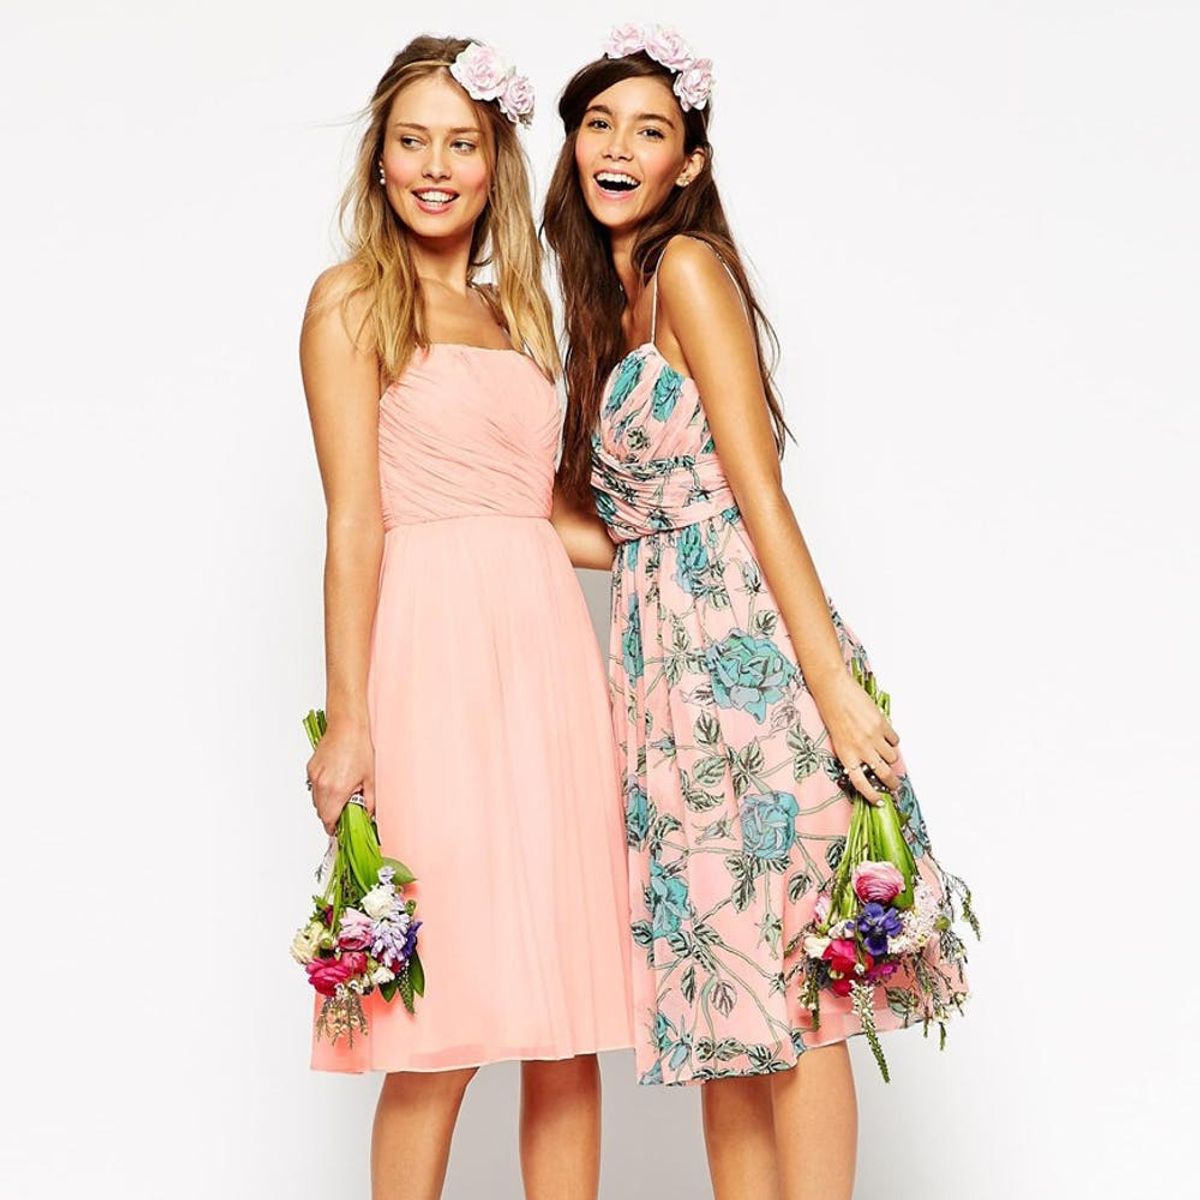 ASOS Has a New Bridesmaids Line and It’s Everything - Brit + Co